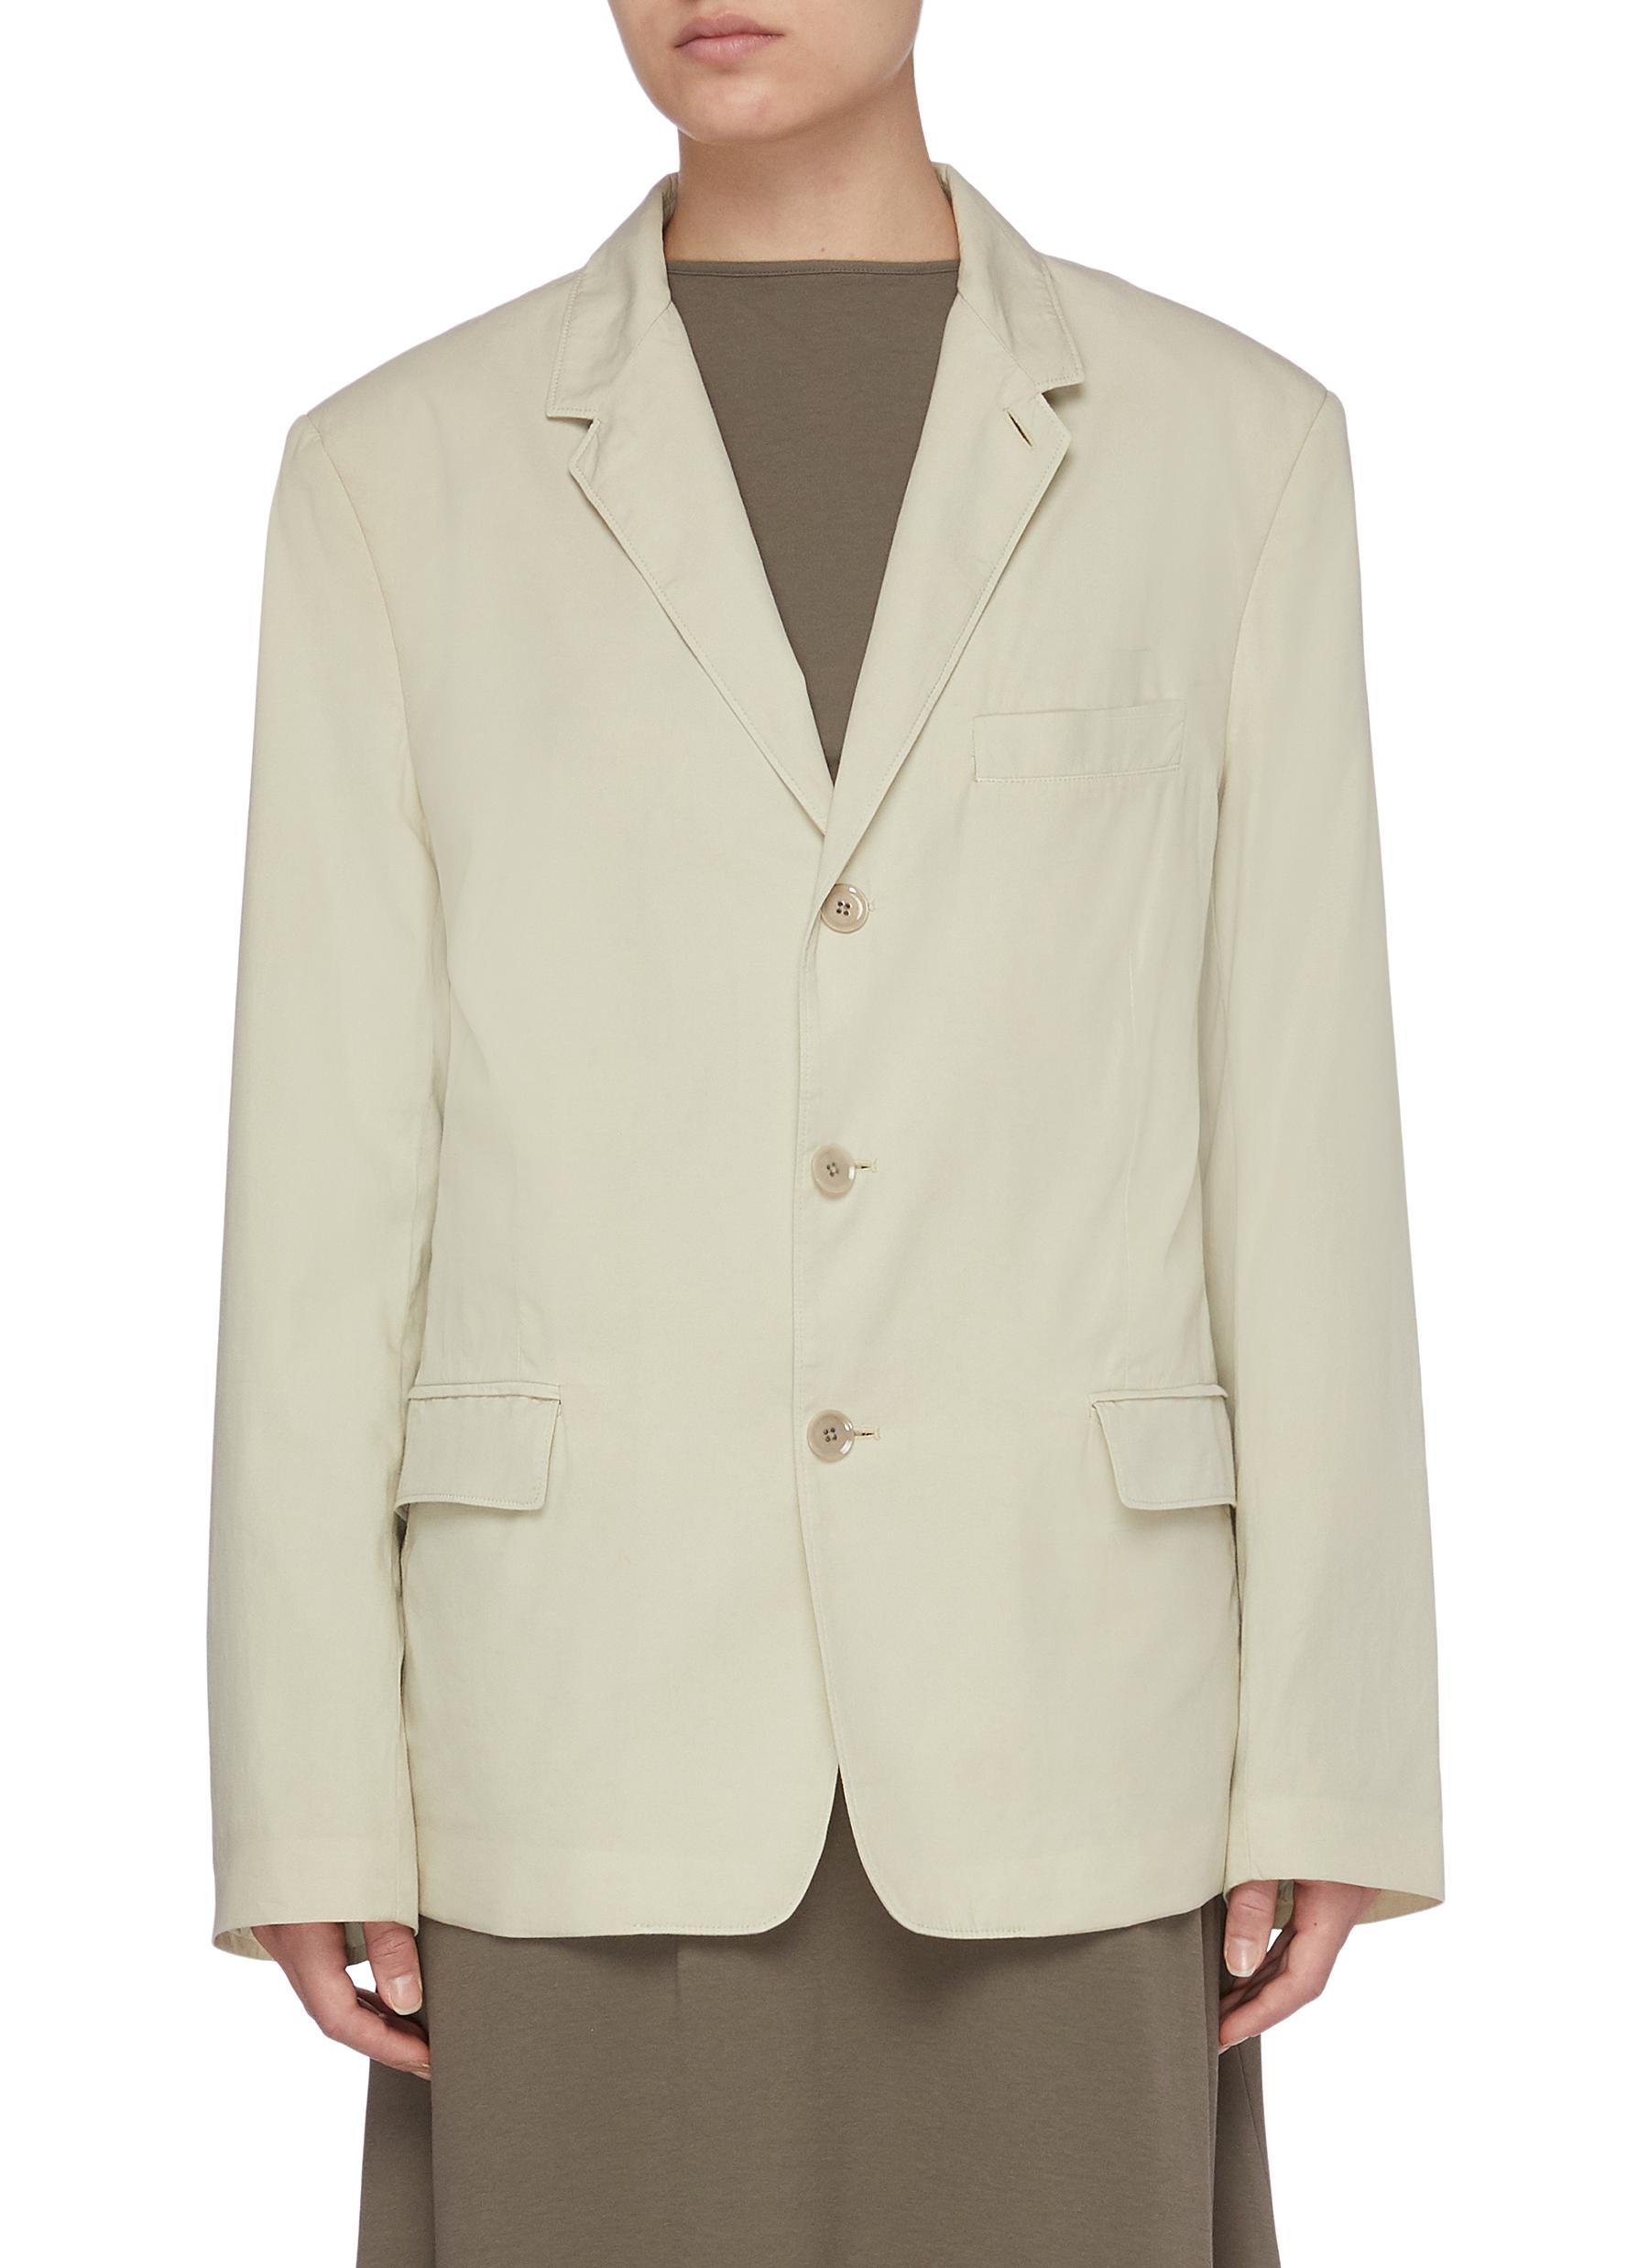 Soft suiting jacket